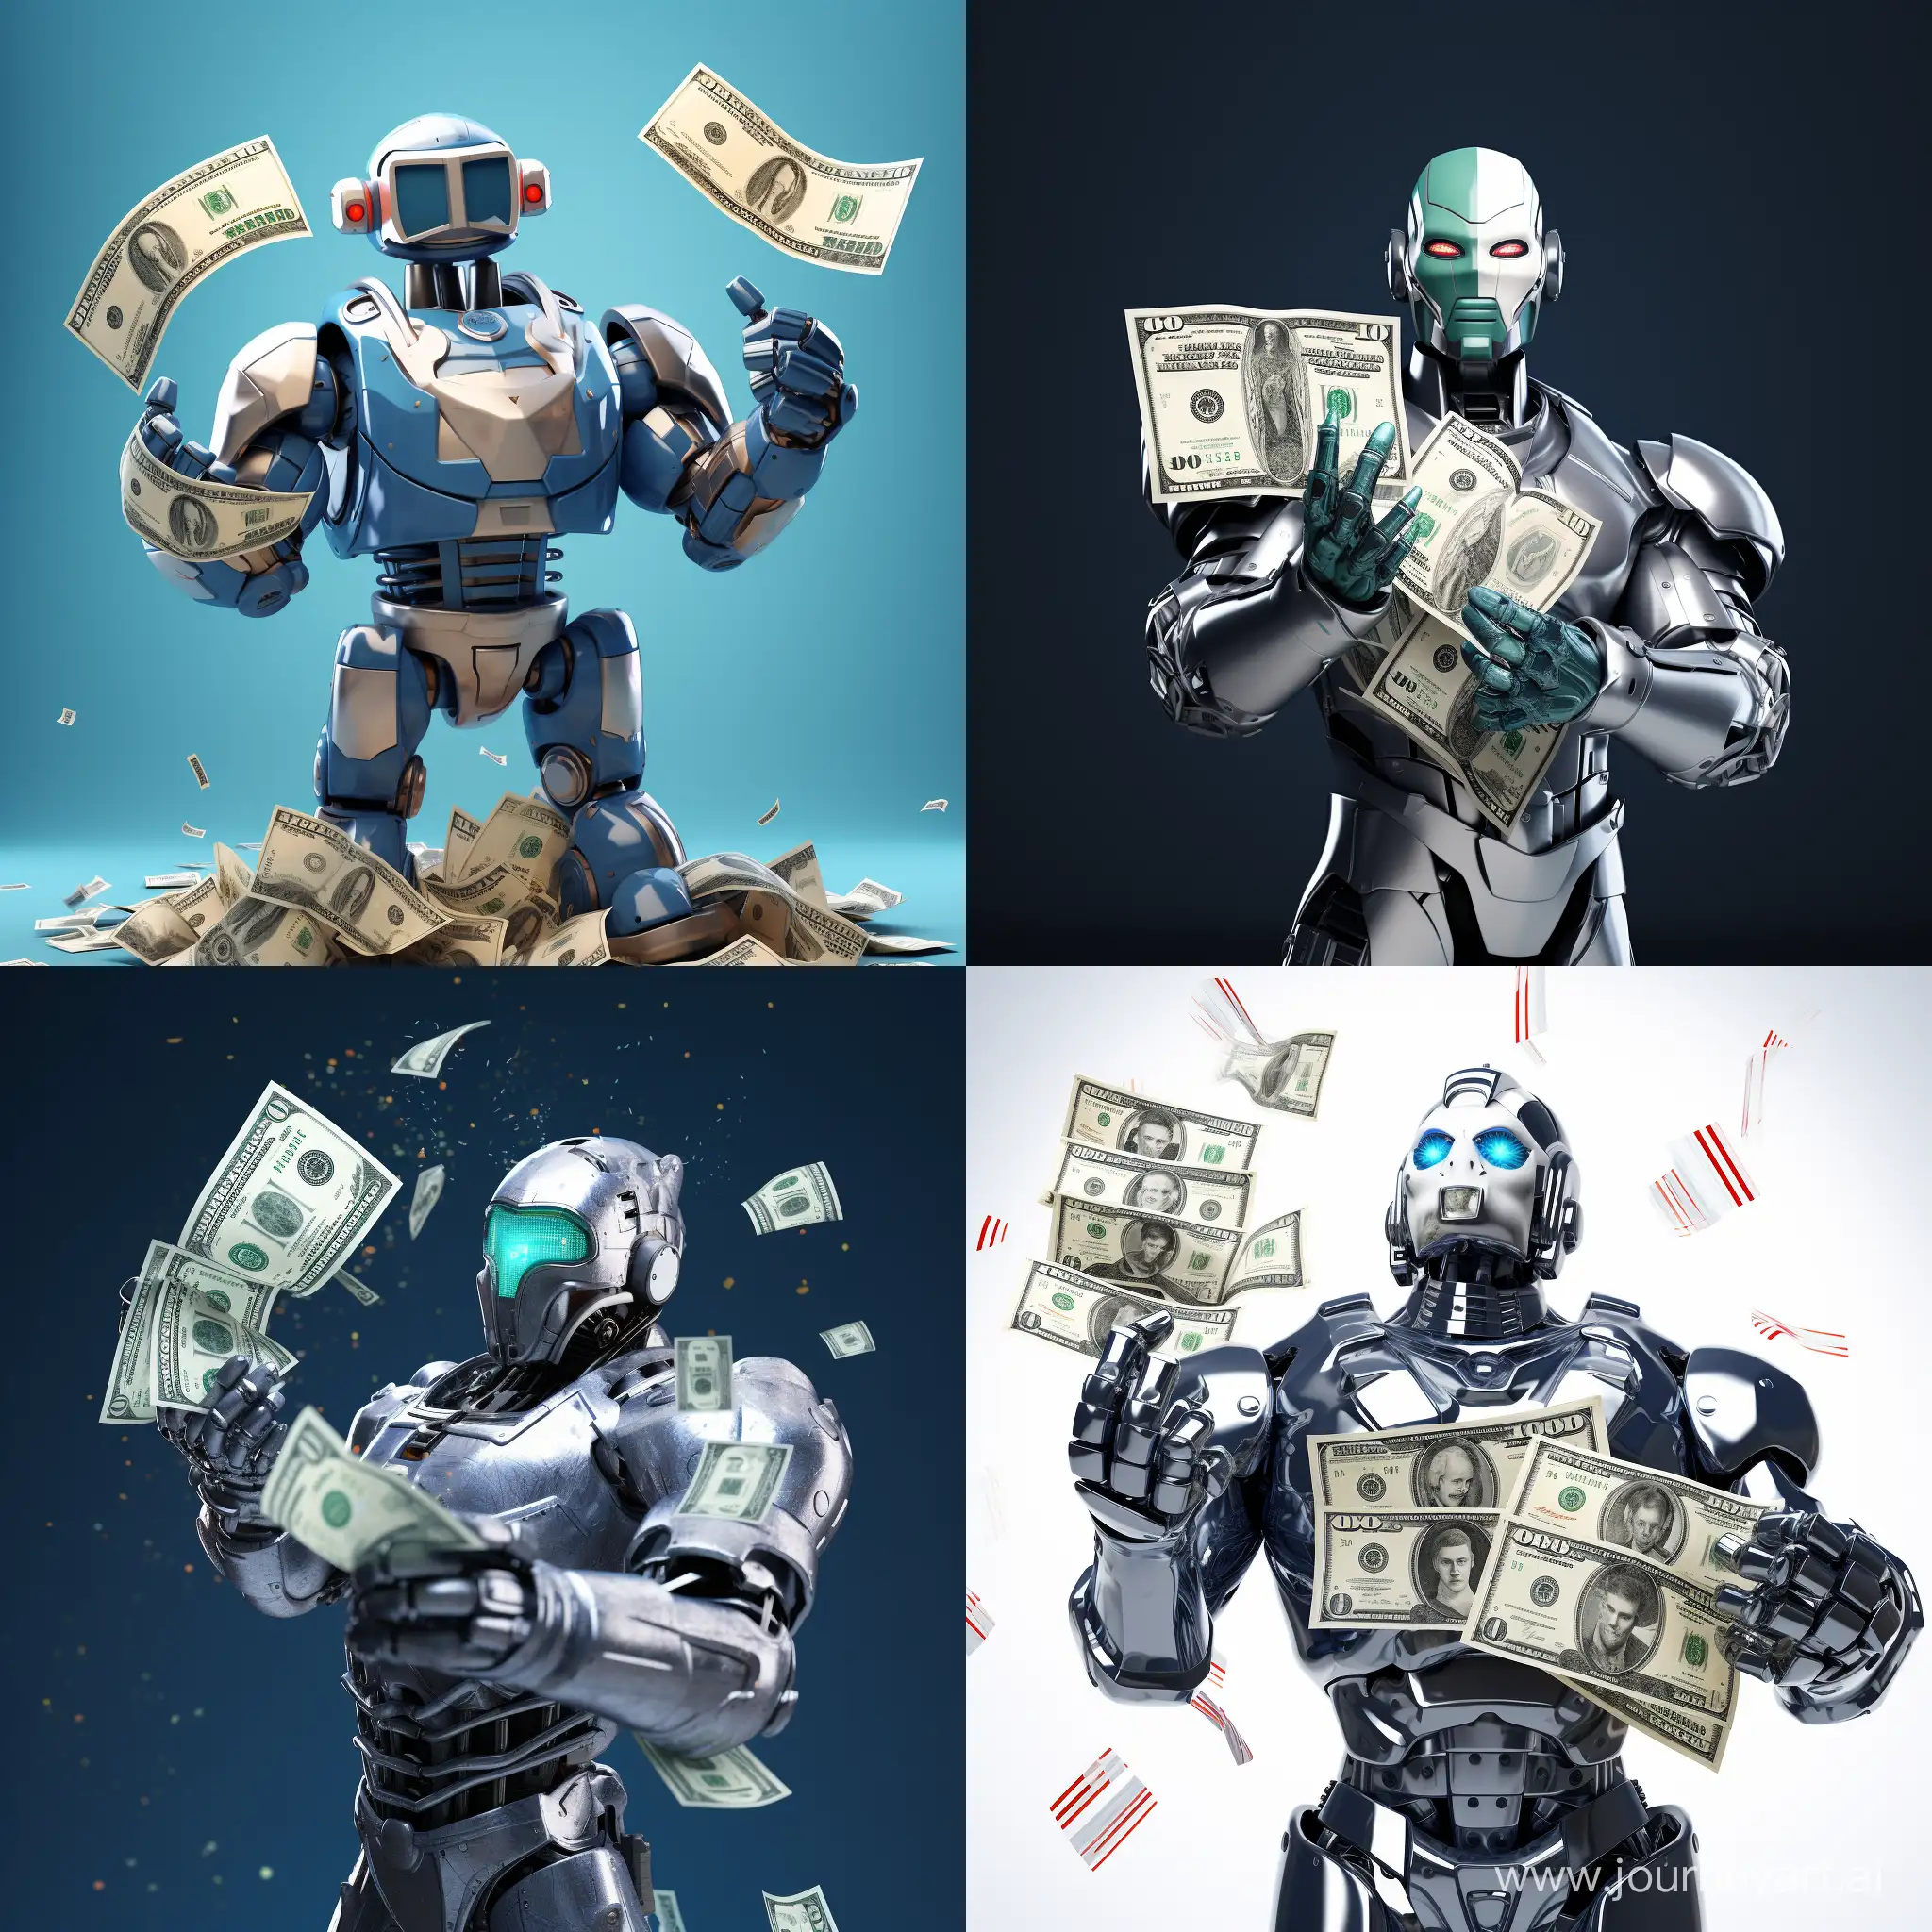 Robot-Holding-American-Dollars-Financial-Technology-Concept